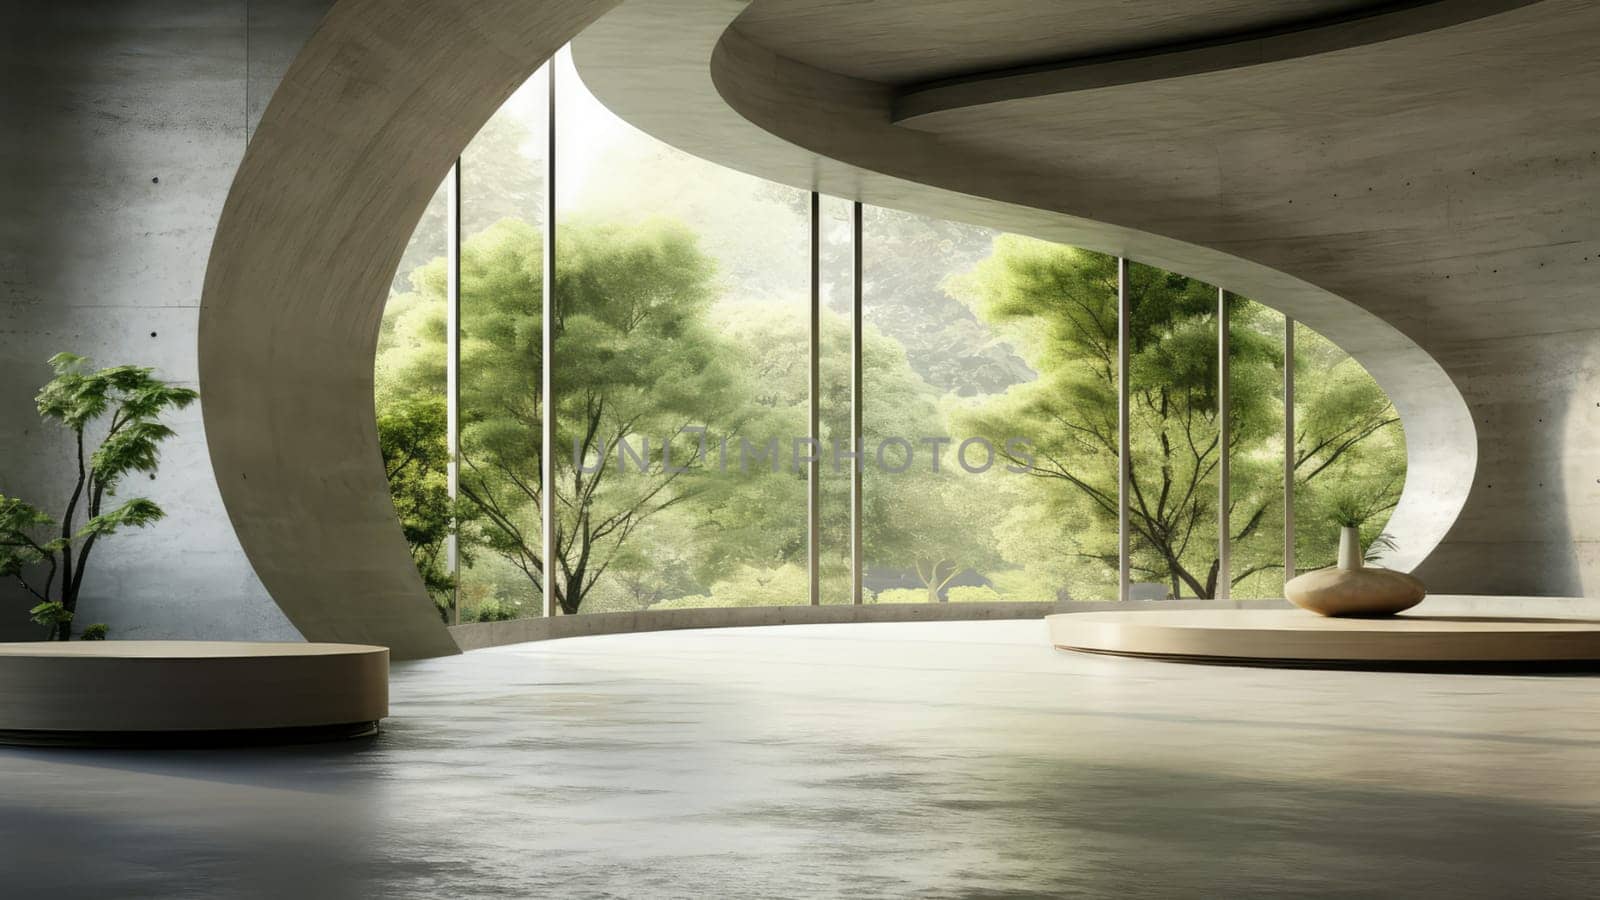 A 3D rendering of a room with a large window overlooking a forest. The room is spacious and has a lot of natural light.